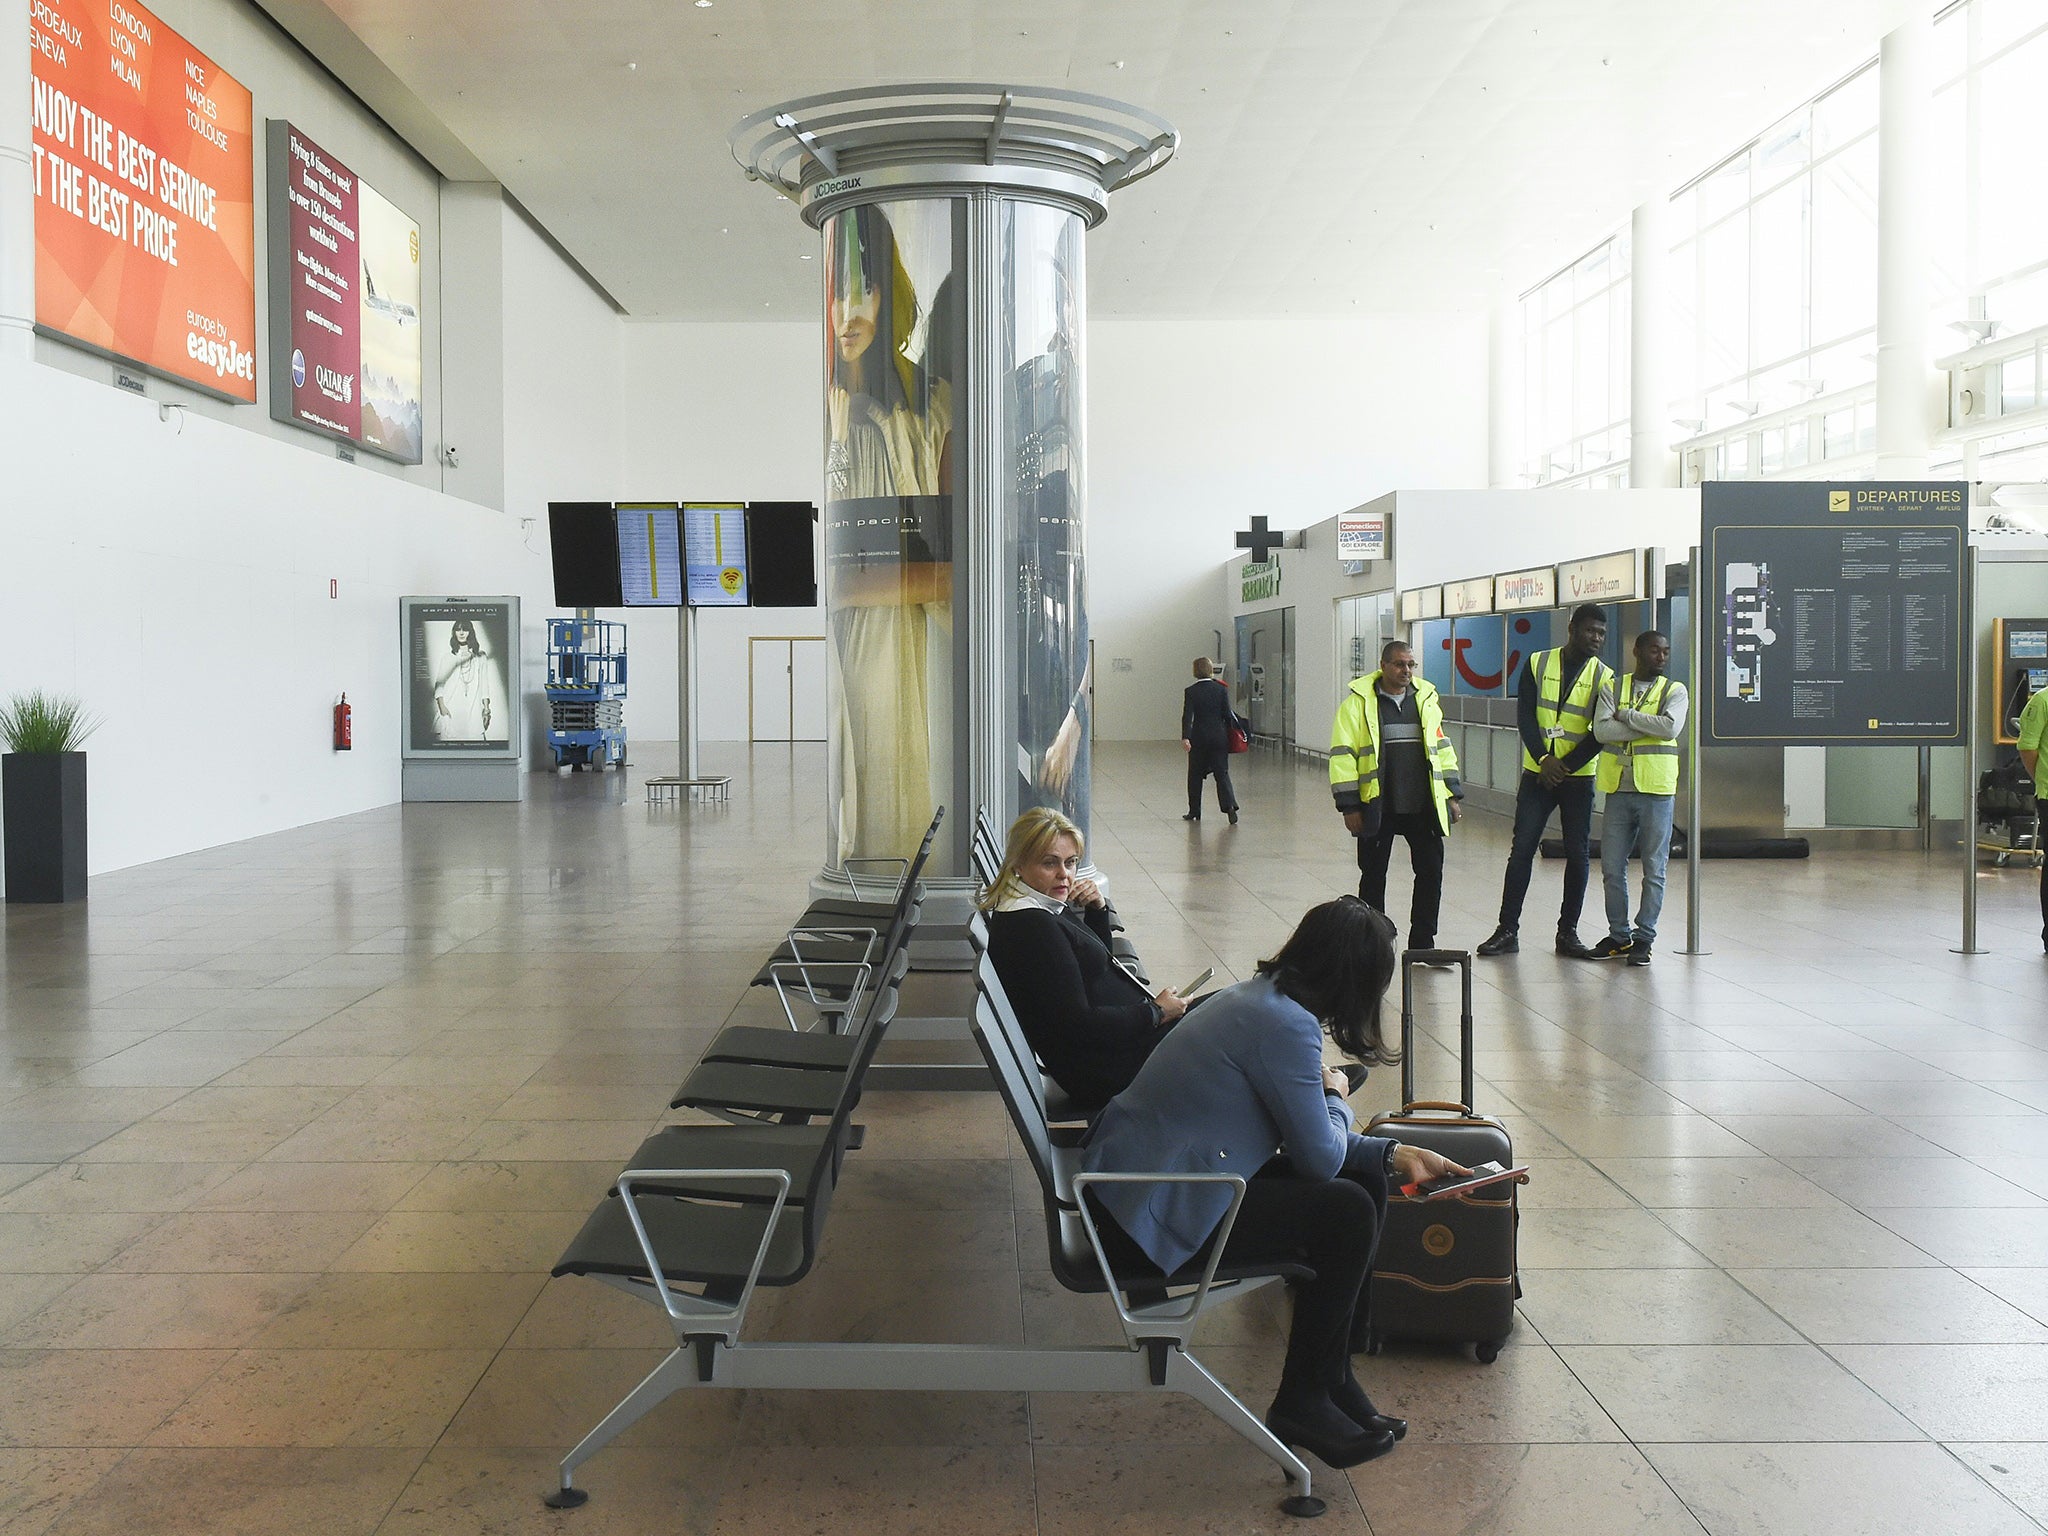 The alert was received for flights arriving at Zaventem Airport - the scene of twin suicide attacks in March which killed 16 people (file photo)